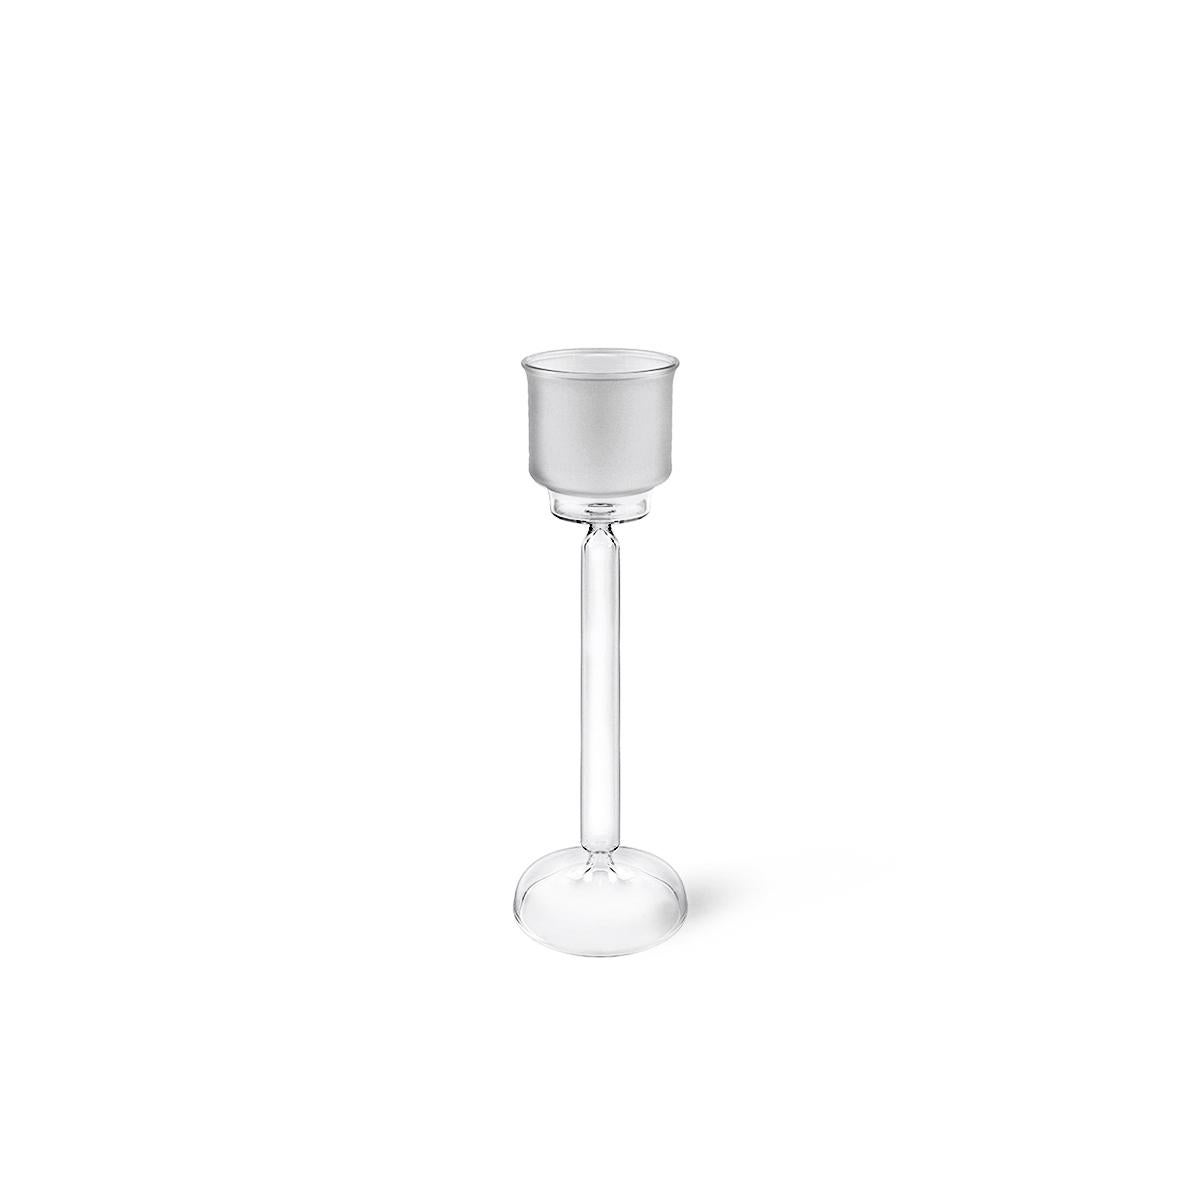 Ambra, designed by Aldo Cibic, is a mouth blown candleholder available in three different sizes. The transparent hollow base and thin stem give to the object lightness, the glazed top blurs the flame to make the light dance in a warm glow.